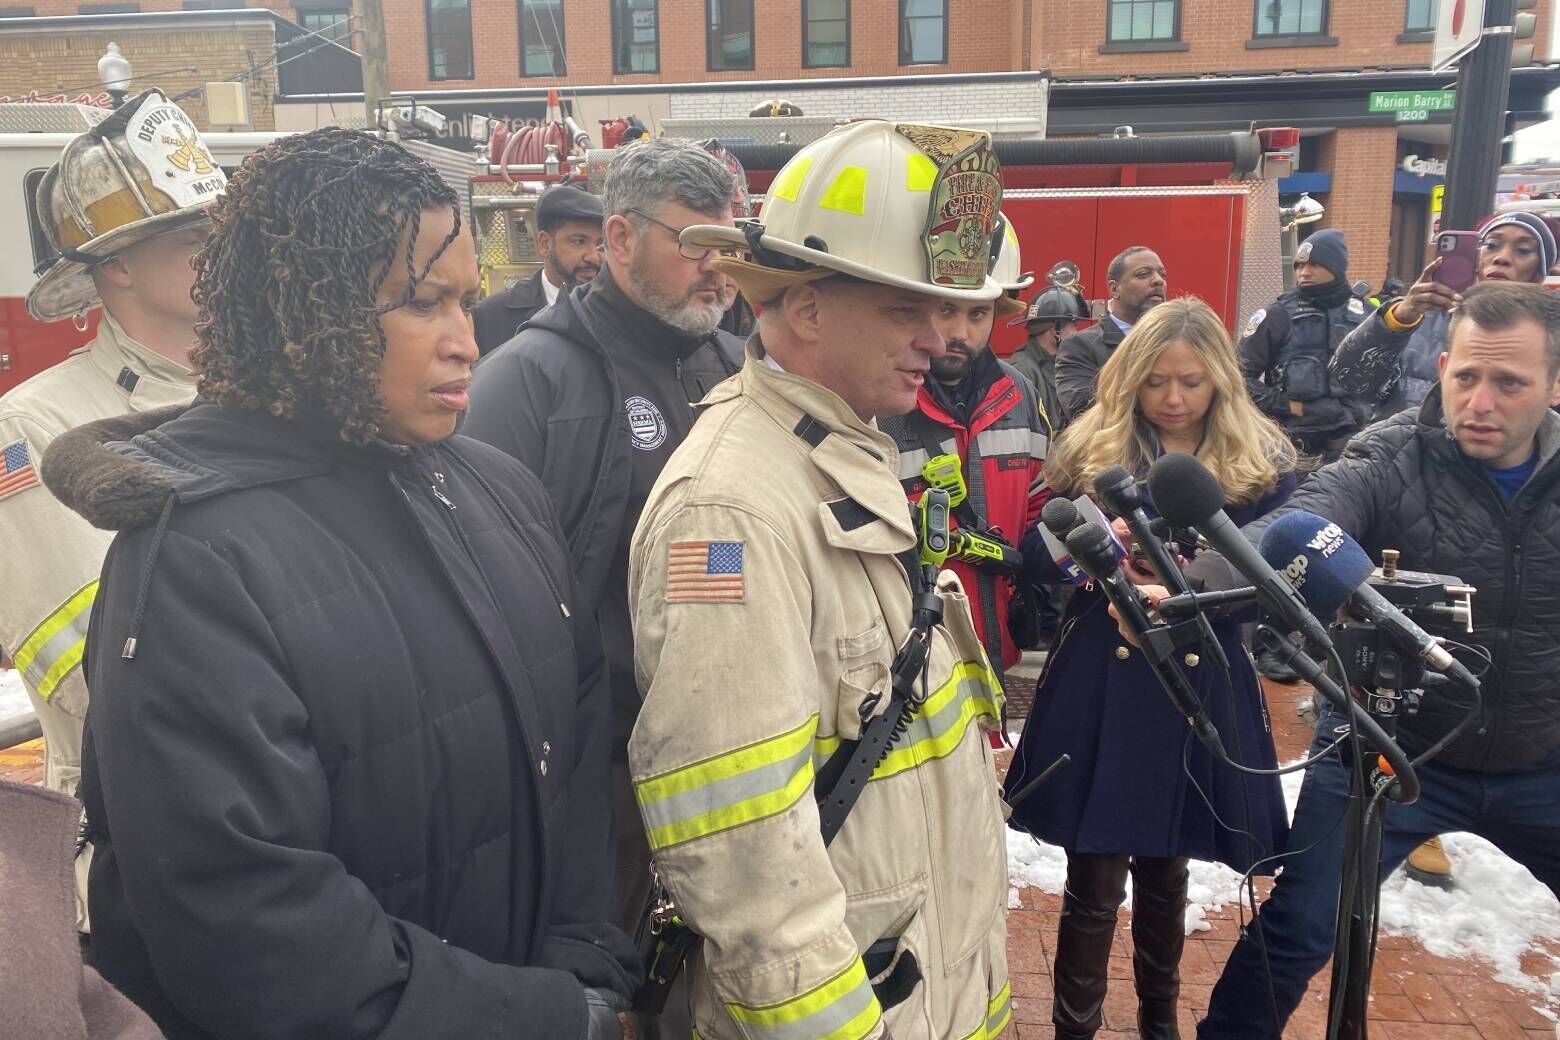 D.C. Mayor Muriel Bowser and Fire Chief John Donnelly brief reporters following the building explosion. (WTOP/John Domen)